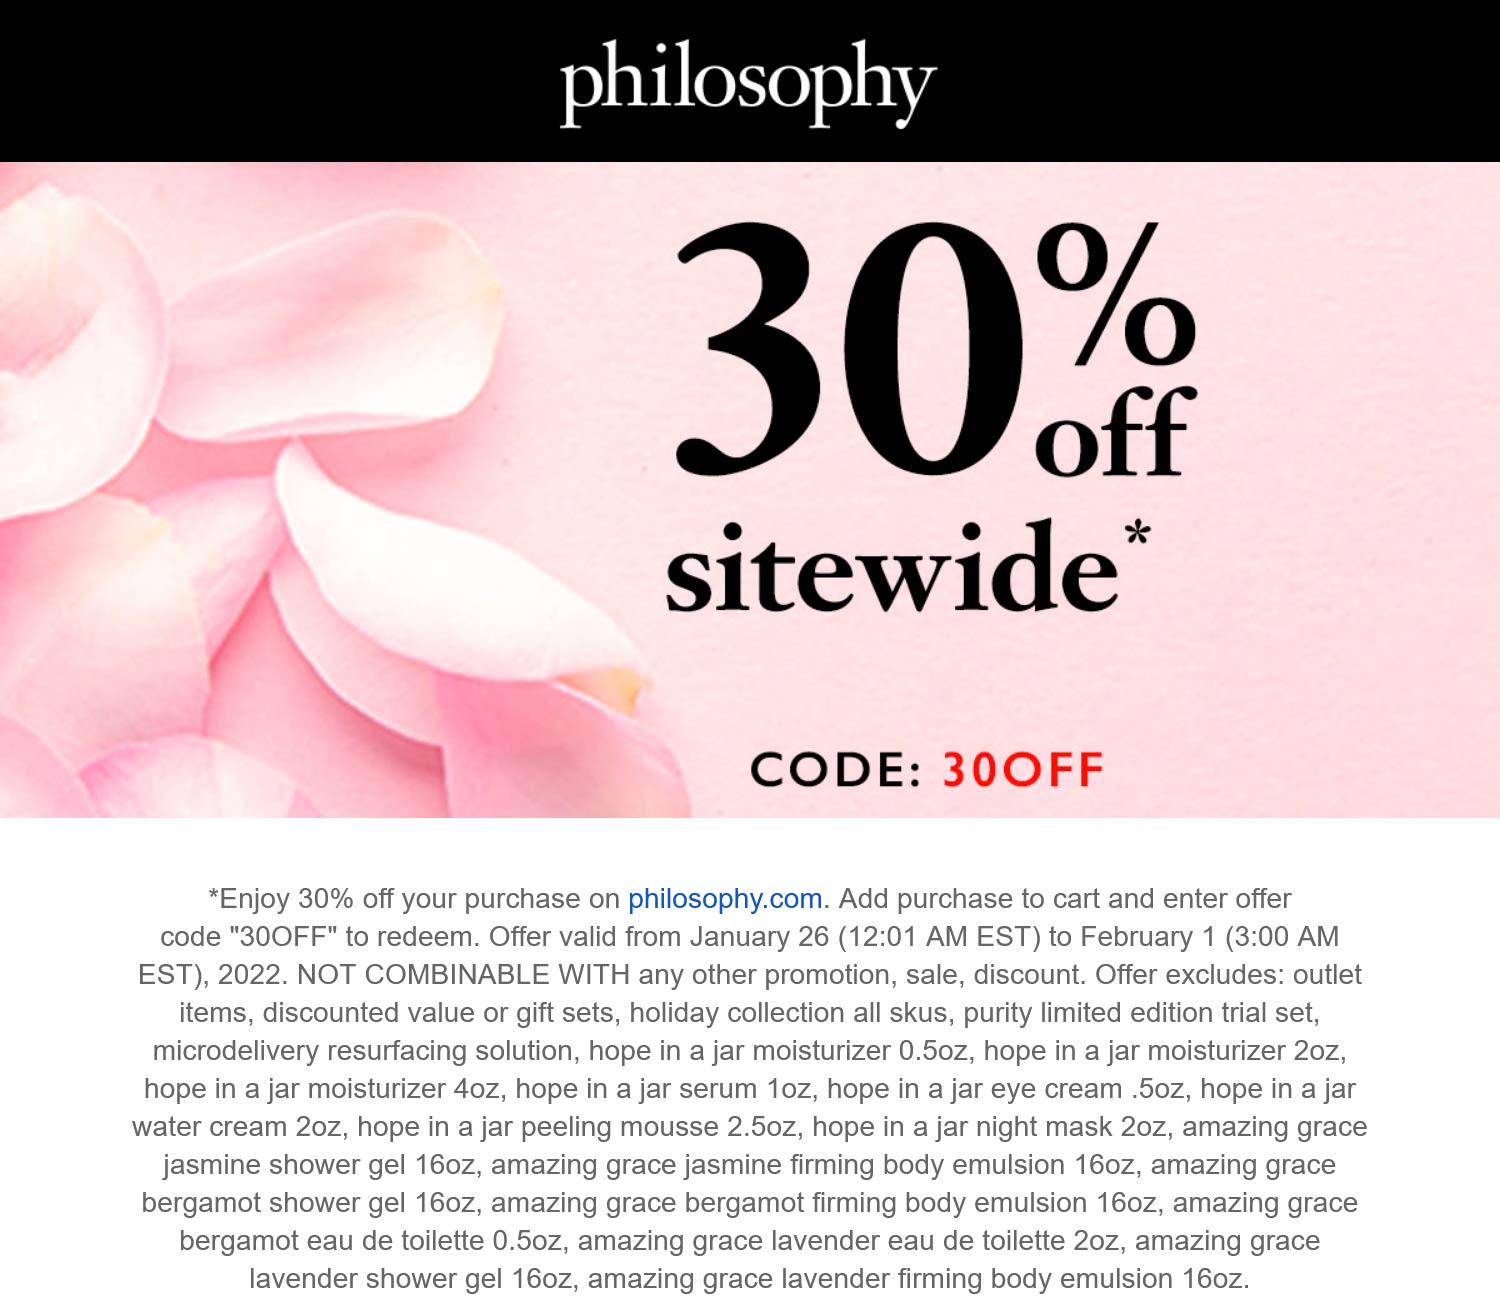 Philosophy stores Coupon  30% off everything online at Philosophy via promo code 30OFF #philosophy 